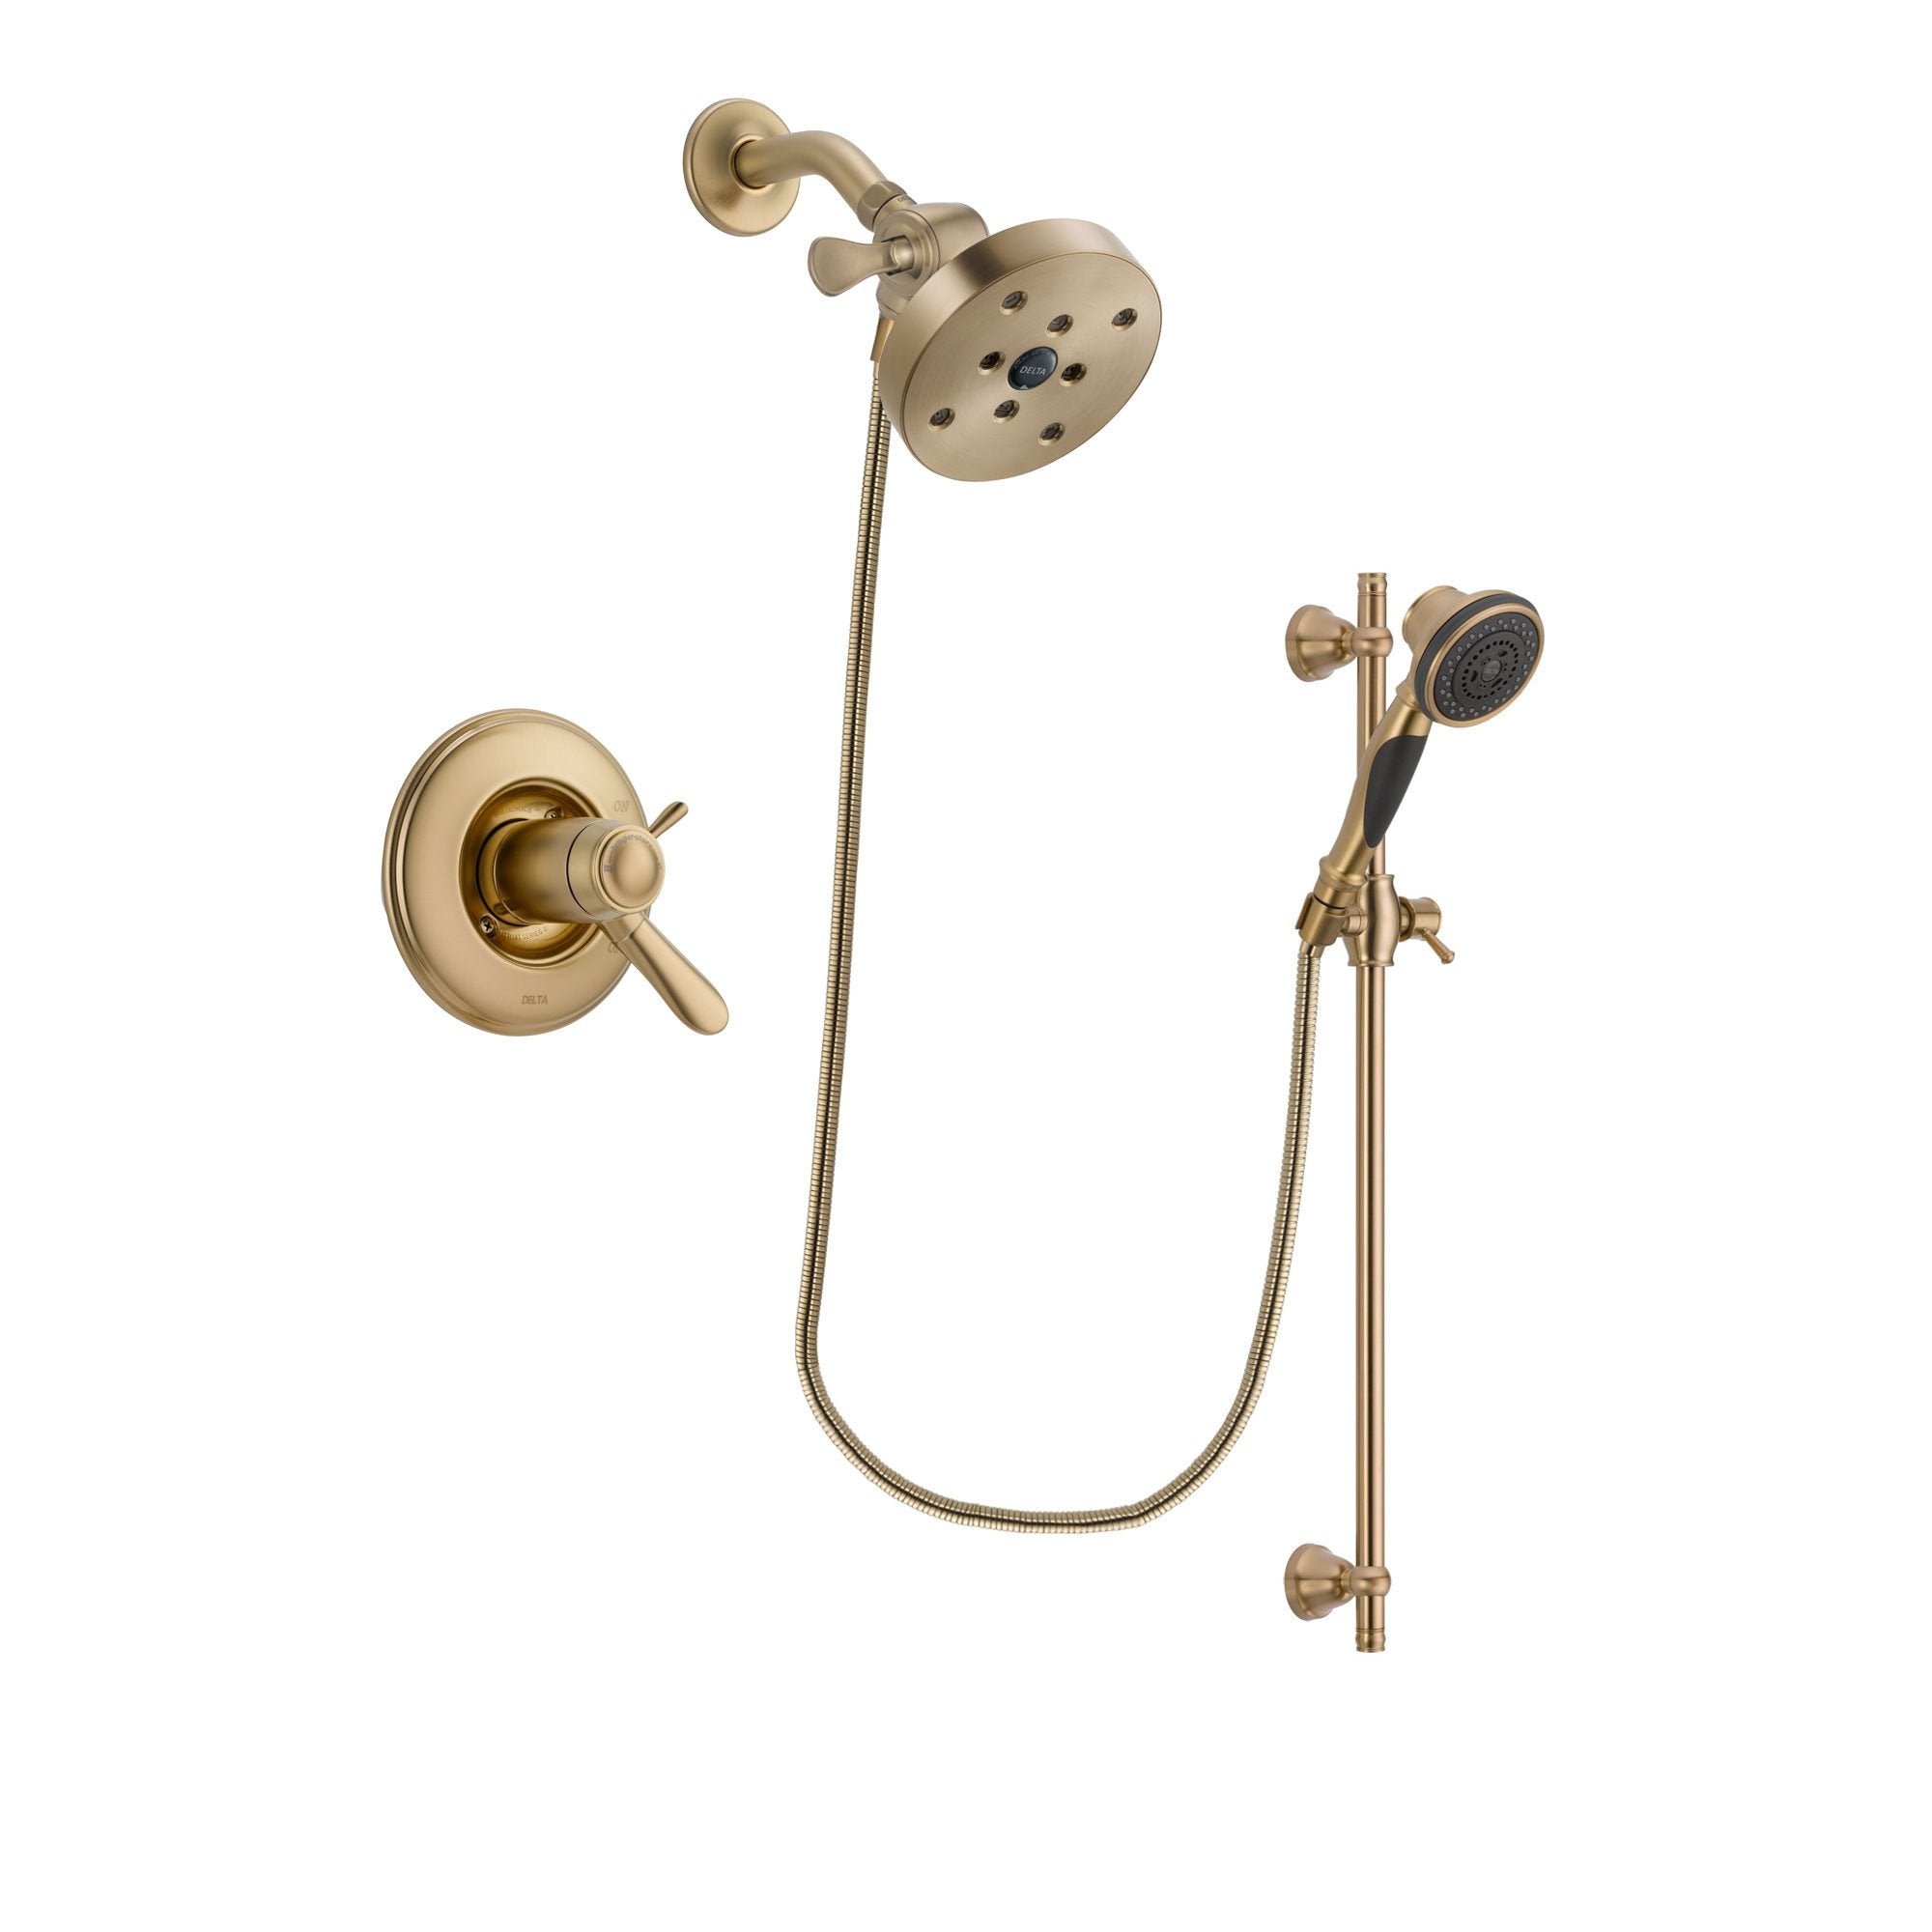 Delta Lahara Champagne Bronze Finish Thermostatic Shower Faucet System Package with 5-1/2 inch Showerhead and Personal Handheld Shower Spray with Slide Bar Includes Rough-in Valve DSP3604V